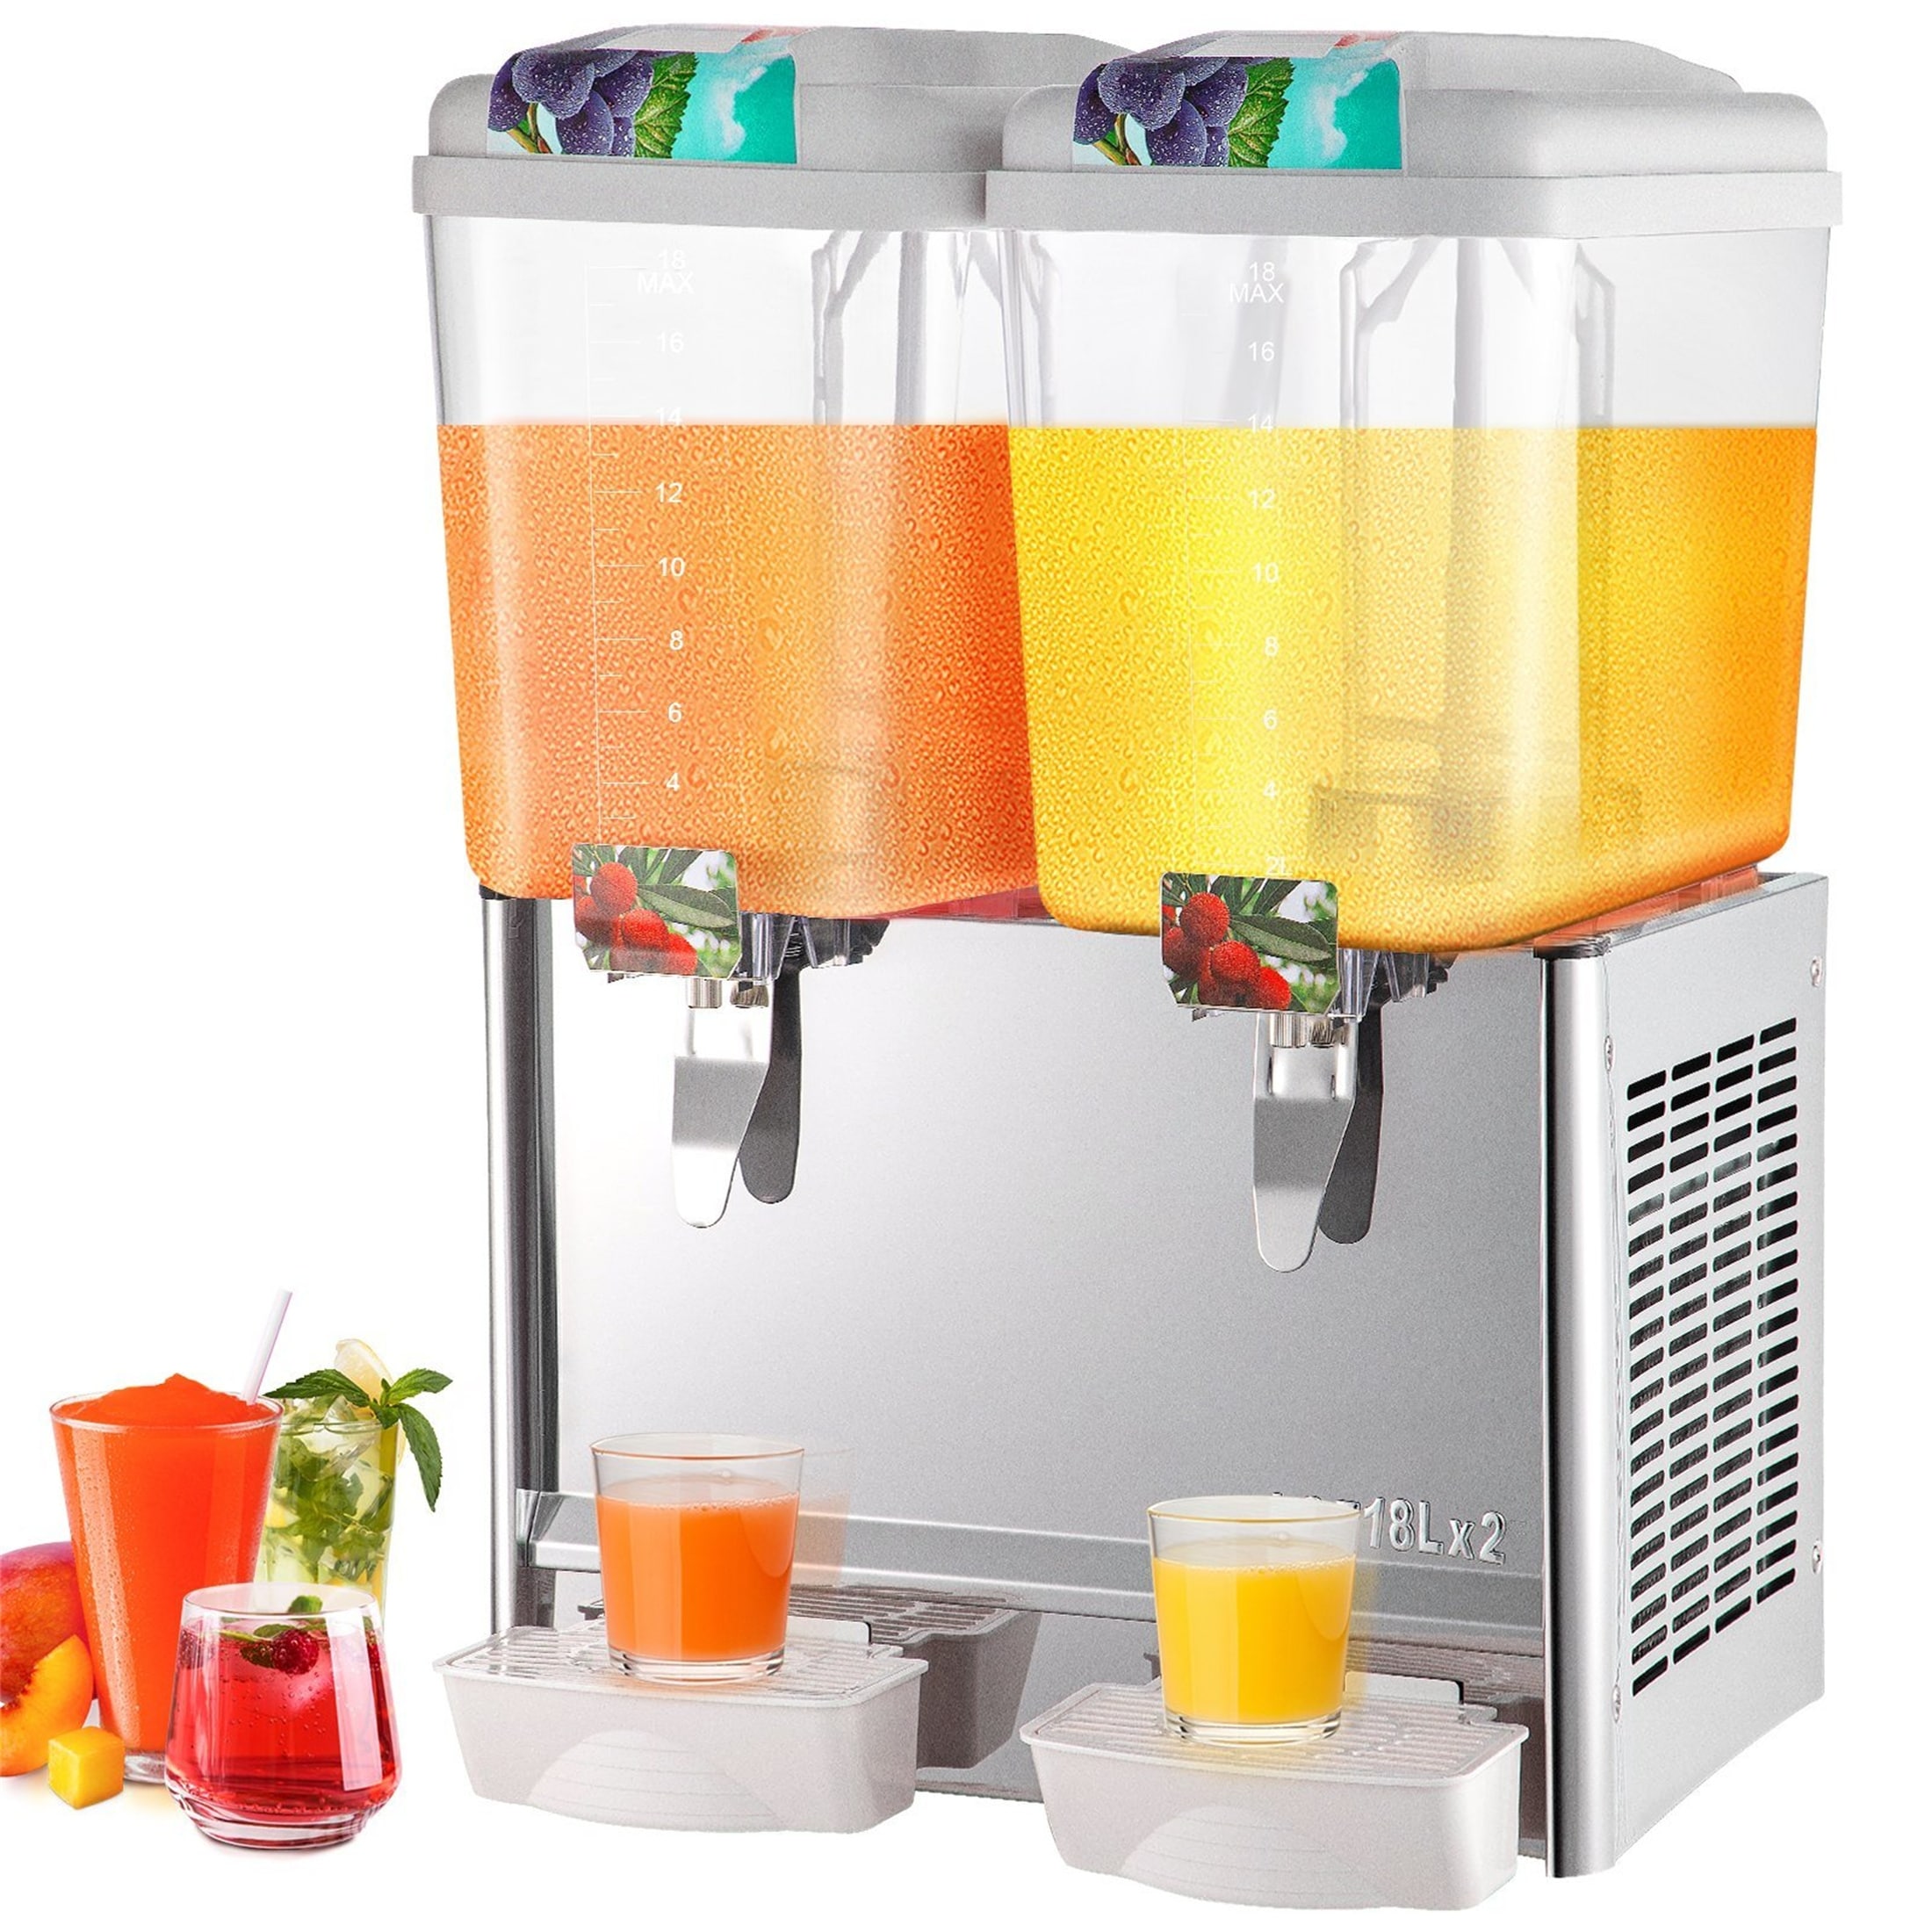 https://ak1.ostkcdn.com/images/products/is/images/direct/bf001f35eec730e1013731ccd201c78c5a77ff89/9.5-Gallon-36L-2-Tanks-Juice-Dispenser-Commercial.jpg